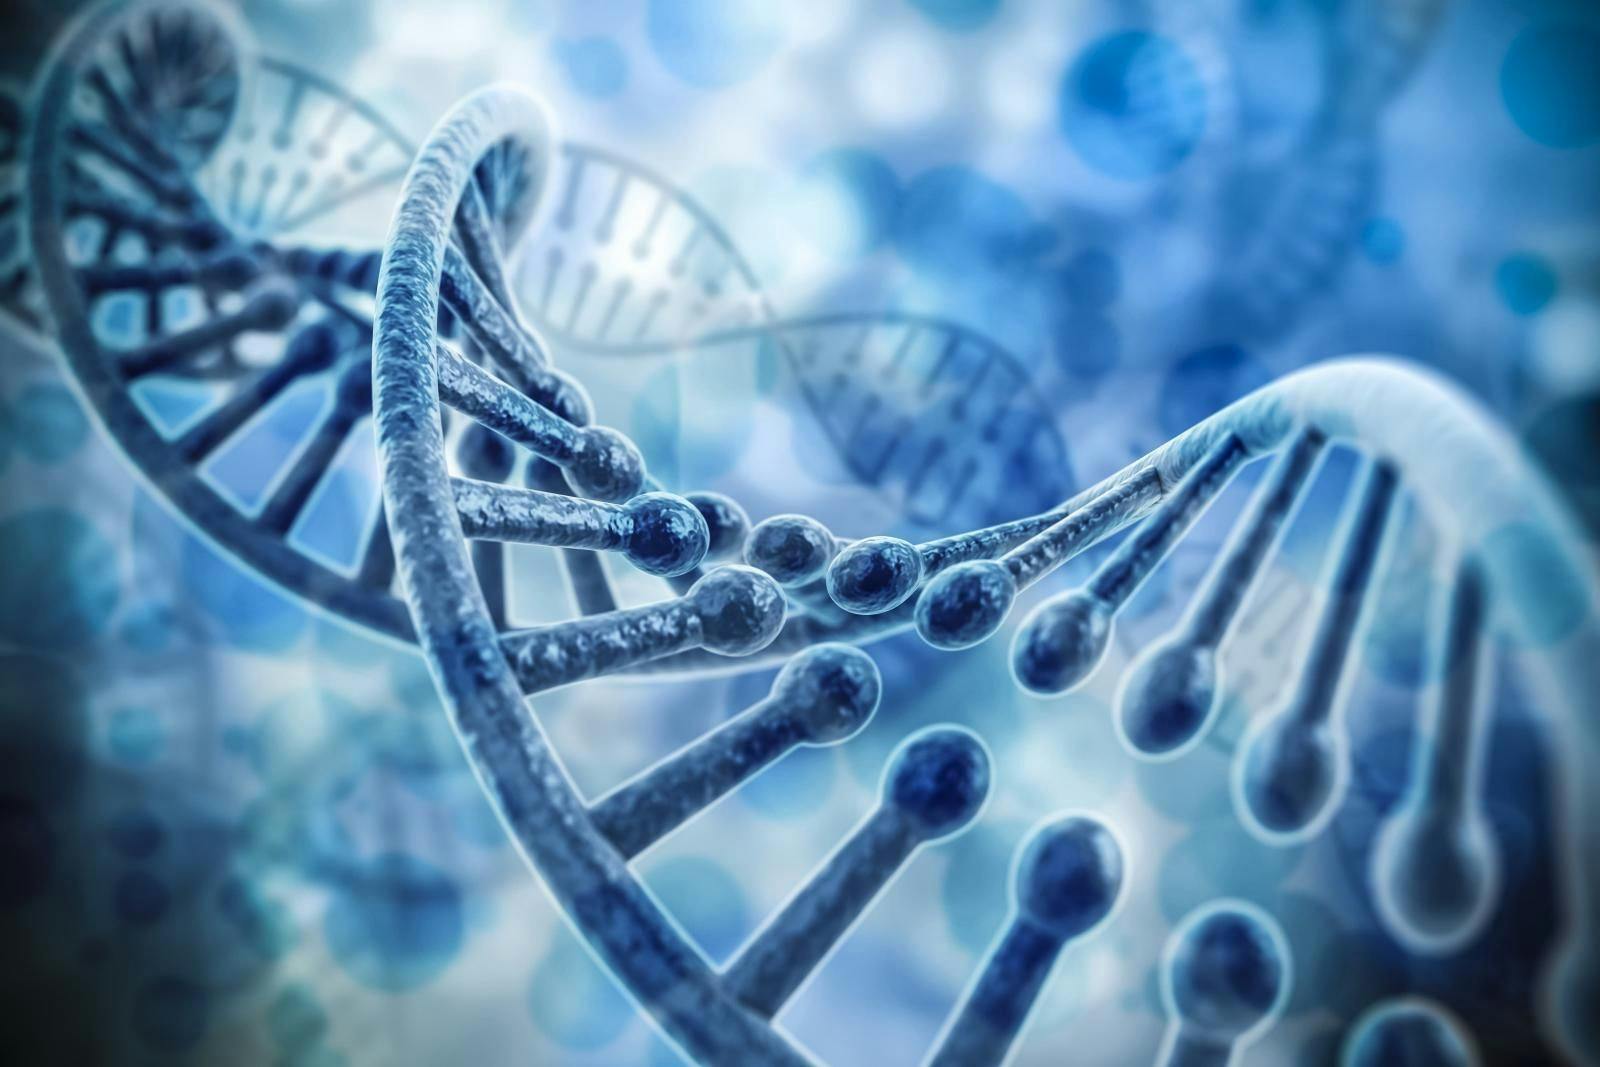 St. Jude Develops Gene Therapy for Severe Combined Immunodeficiency